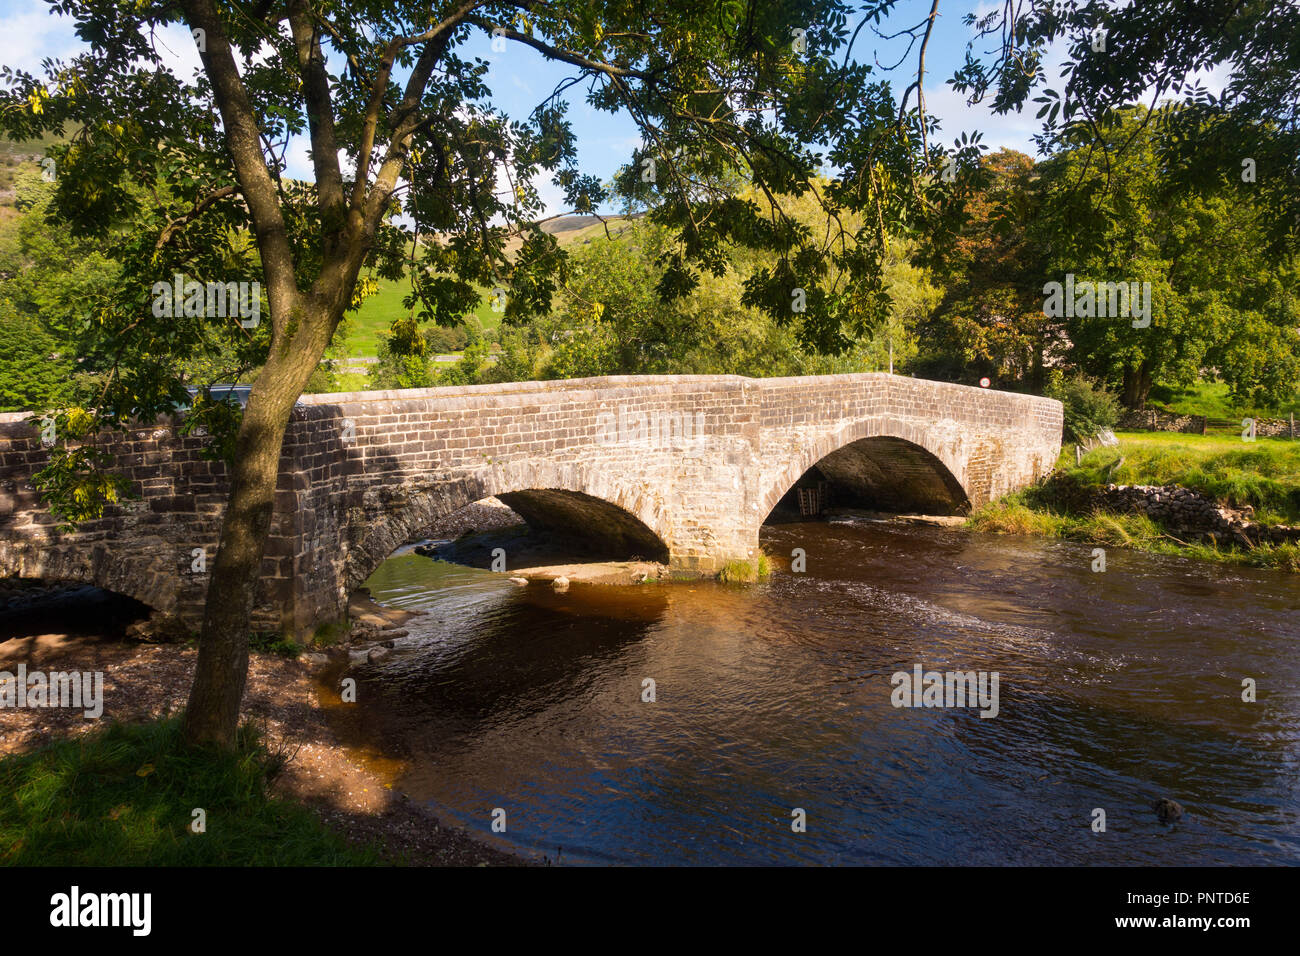 The bridge over the river Wharfe at Buckden in the Yorkshire Dales Stock Photo